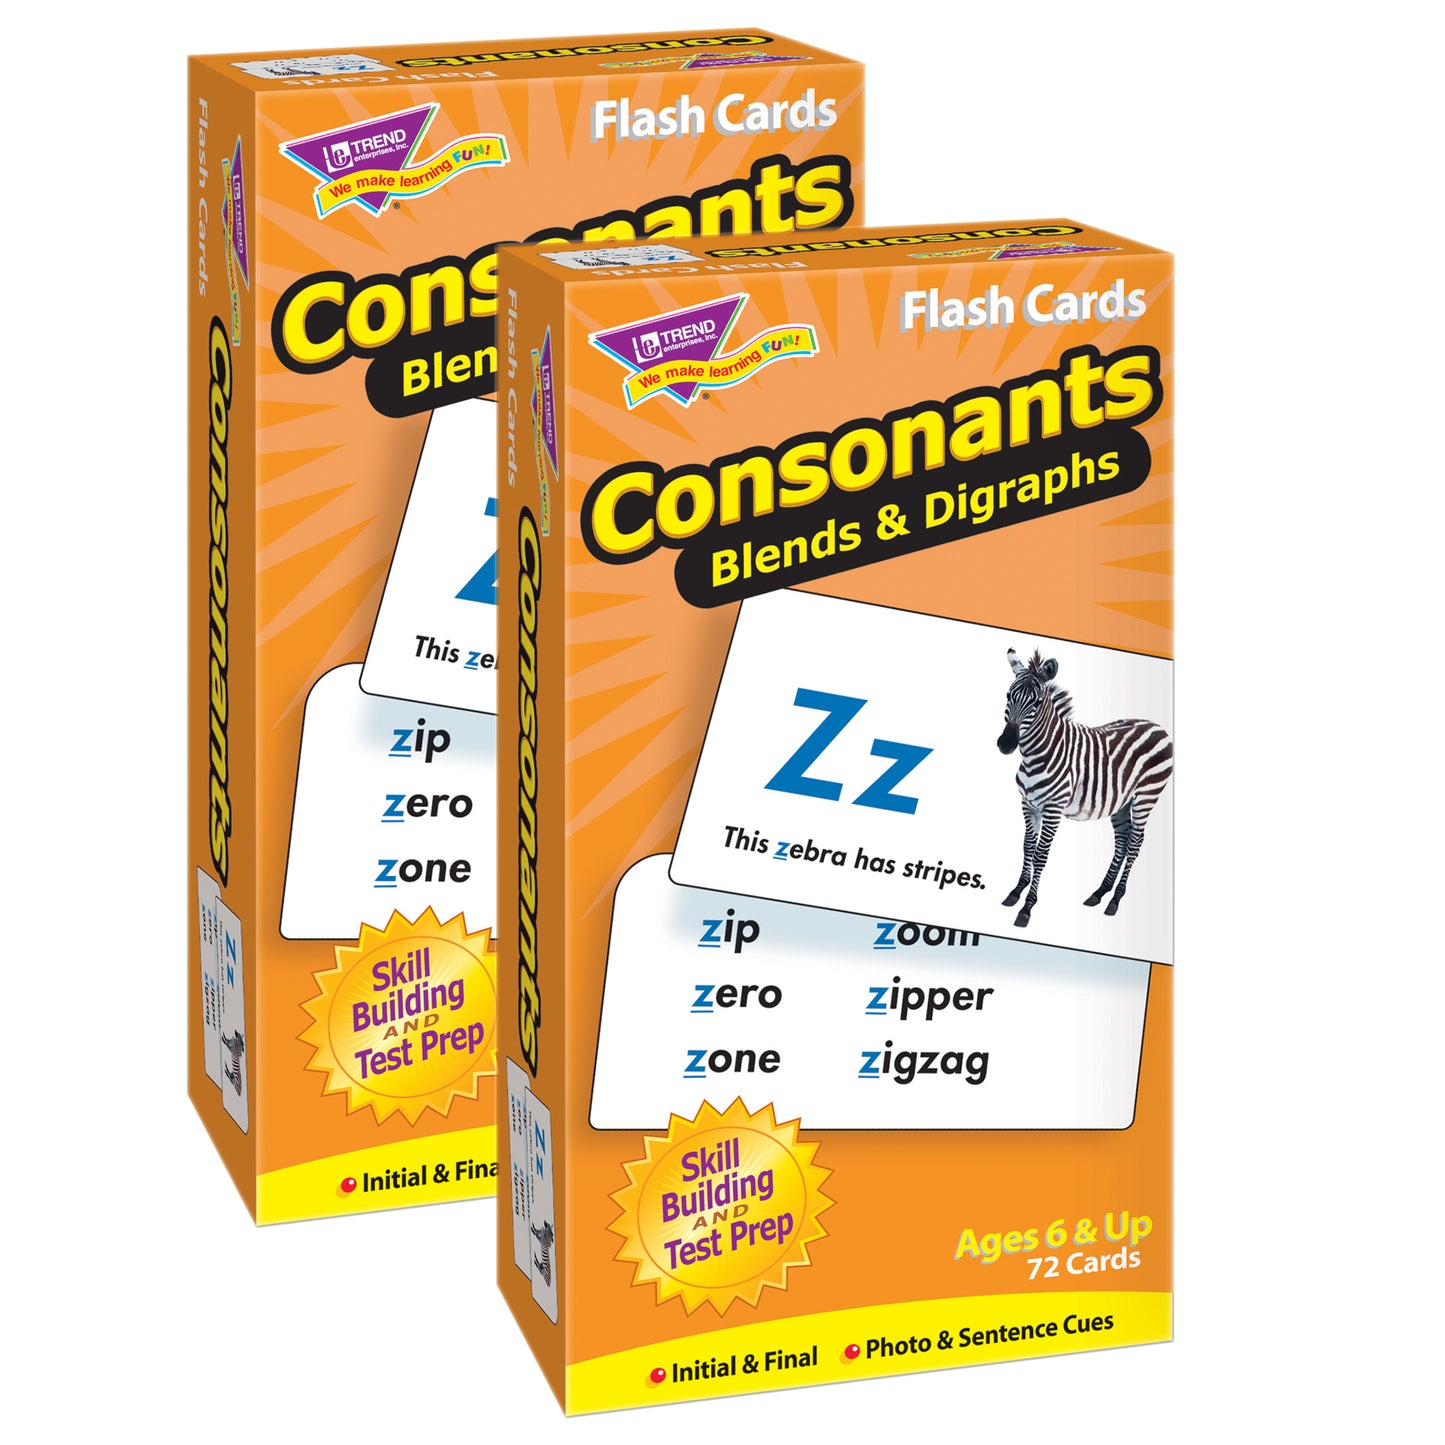 Pack of 2 Consonants Skill Drill Flash Cards, Photo Cues, Word & Sentence Examples, Great for Skill Building and Test Prep, 72 Cards Included, Ages 6 and Up